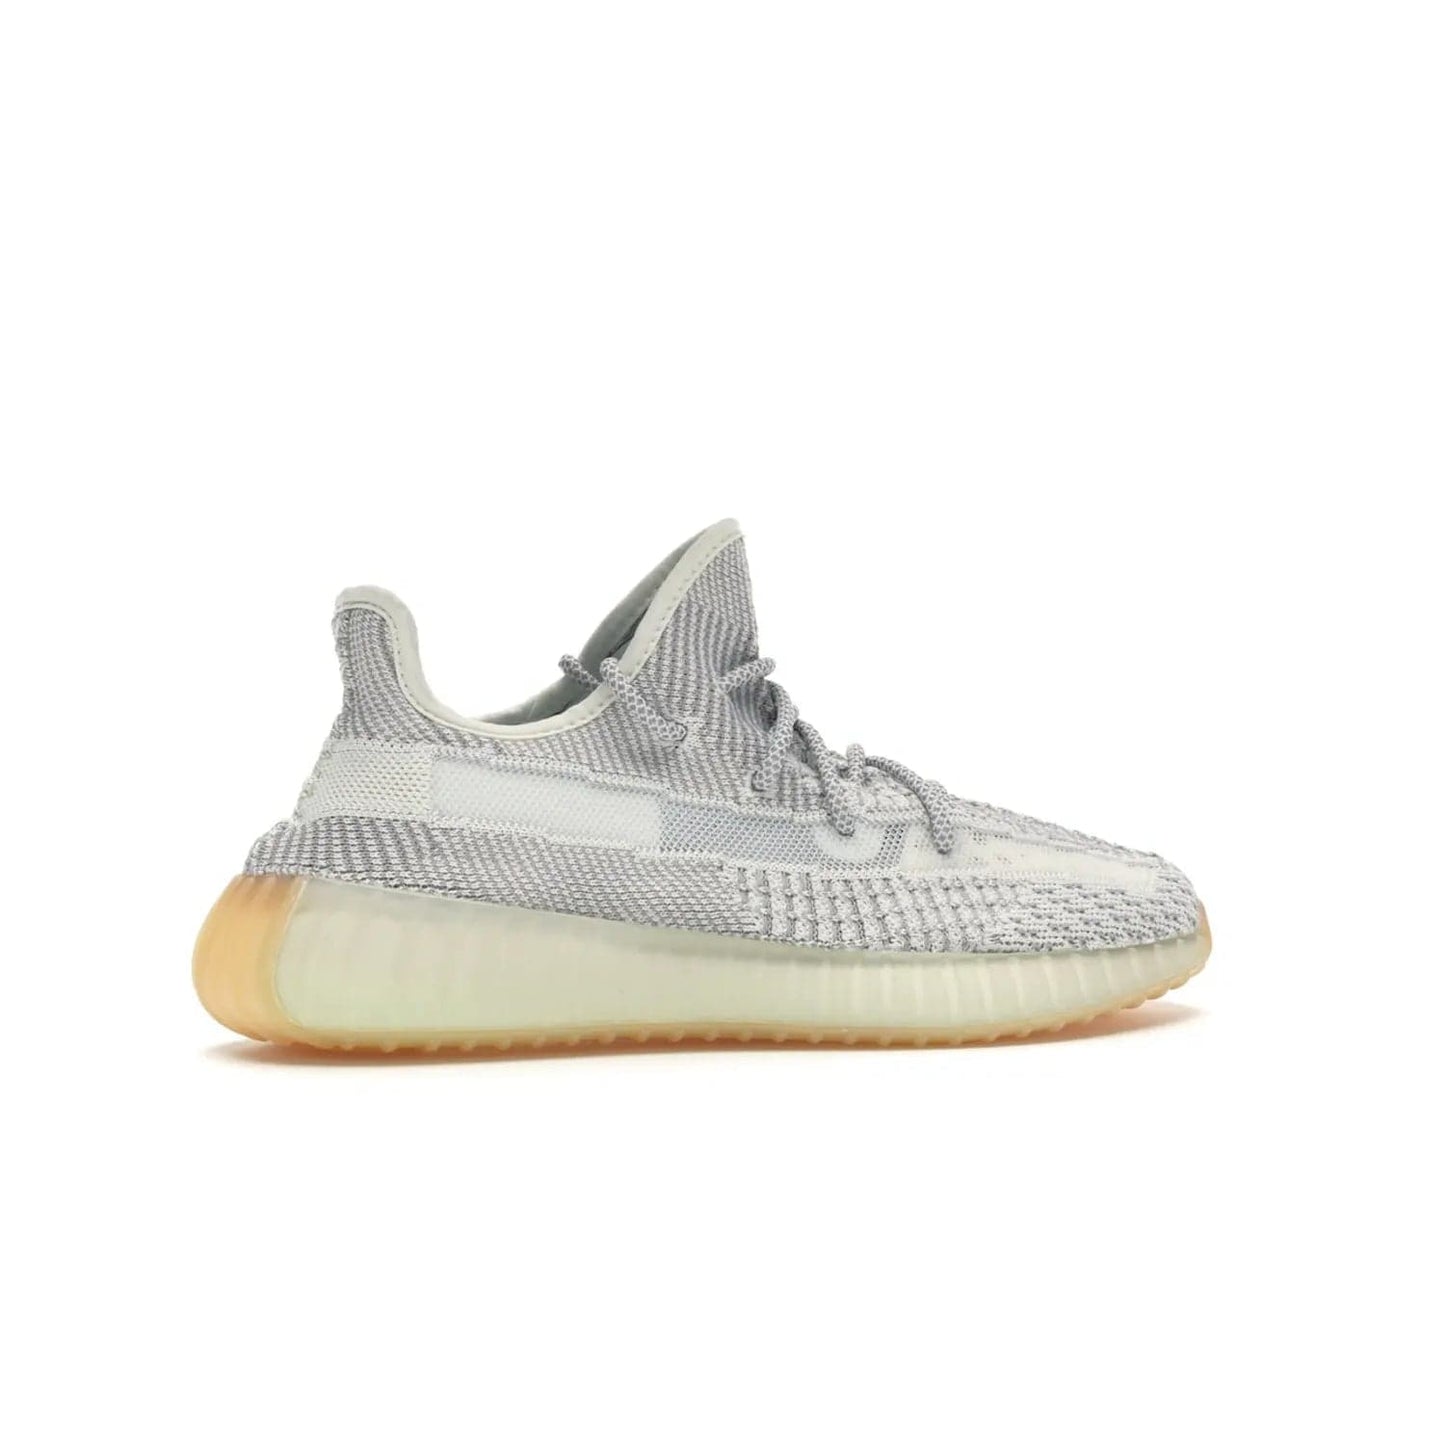 adidas Yeezy Boost 350 V2 Yeshaya (Non-Reflective) - Image 35 - Only at www.BallersClubKickz.com - Step out in style with the adidas Yeezy Boost 350 V2 Yeshaya (Non-Reflective). Gray-and-white Primeknit upper with mesh side stripe & rope laces, plus a translucent Boost sole with a hint of yellow. Make a statement and feel comfortable with this stylish sneaker.